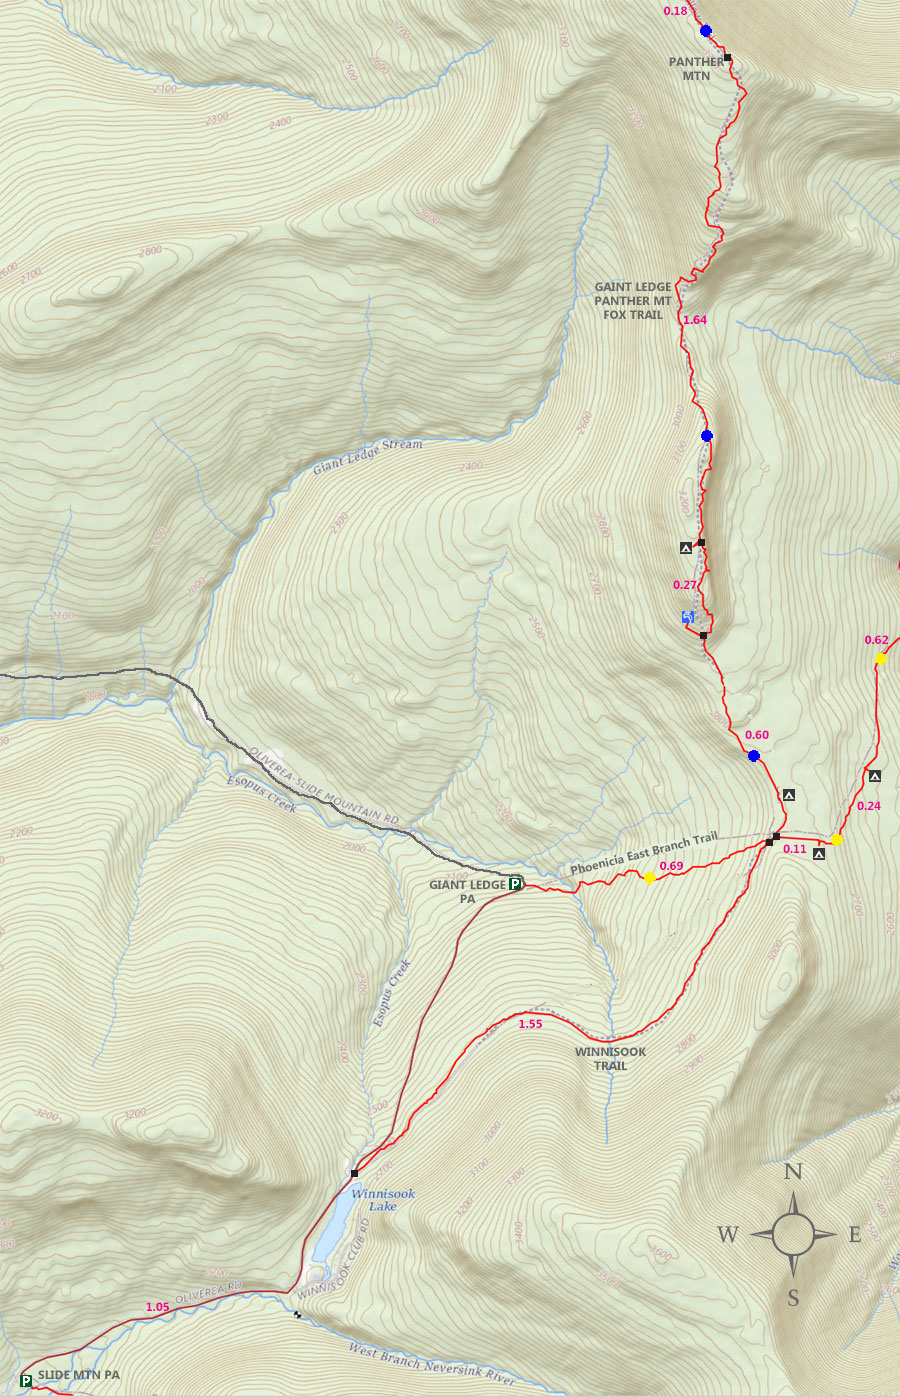 Giant Ledge Panther Mountain GPS map